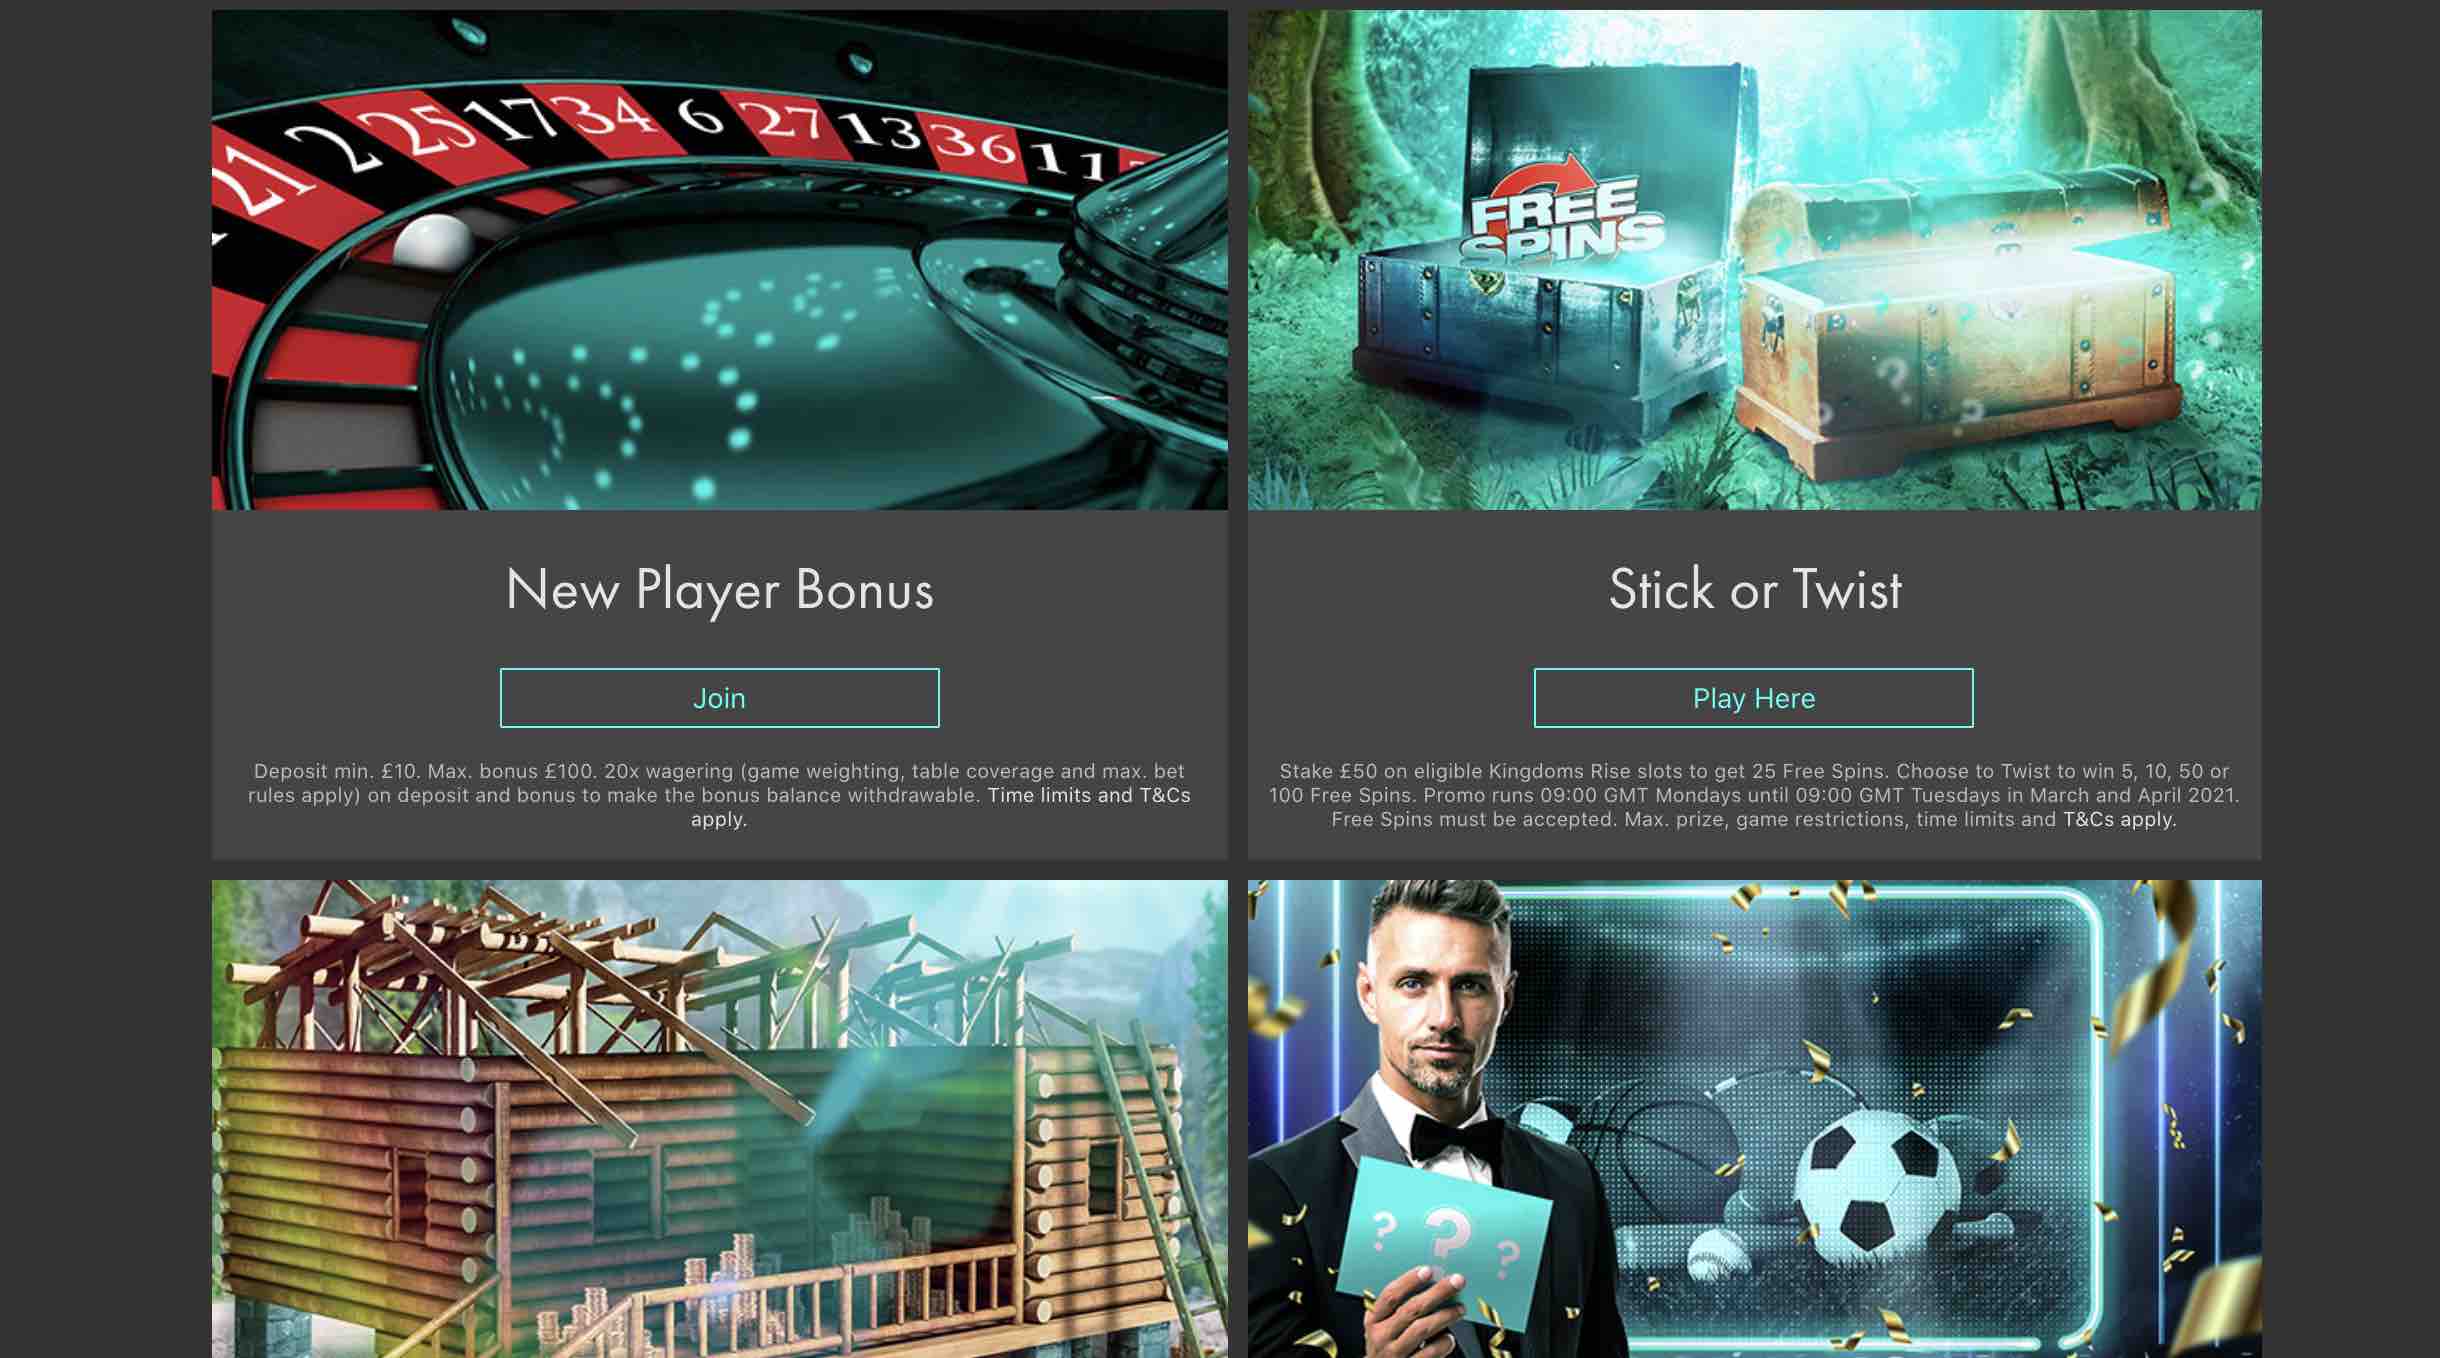 Bet365: The Casino Site That Offers The Best Gaming Experience For Indian Players